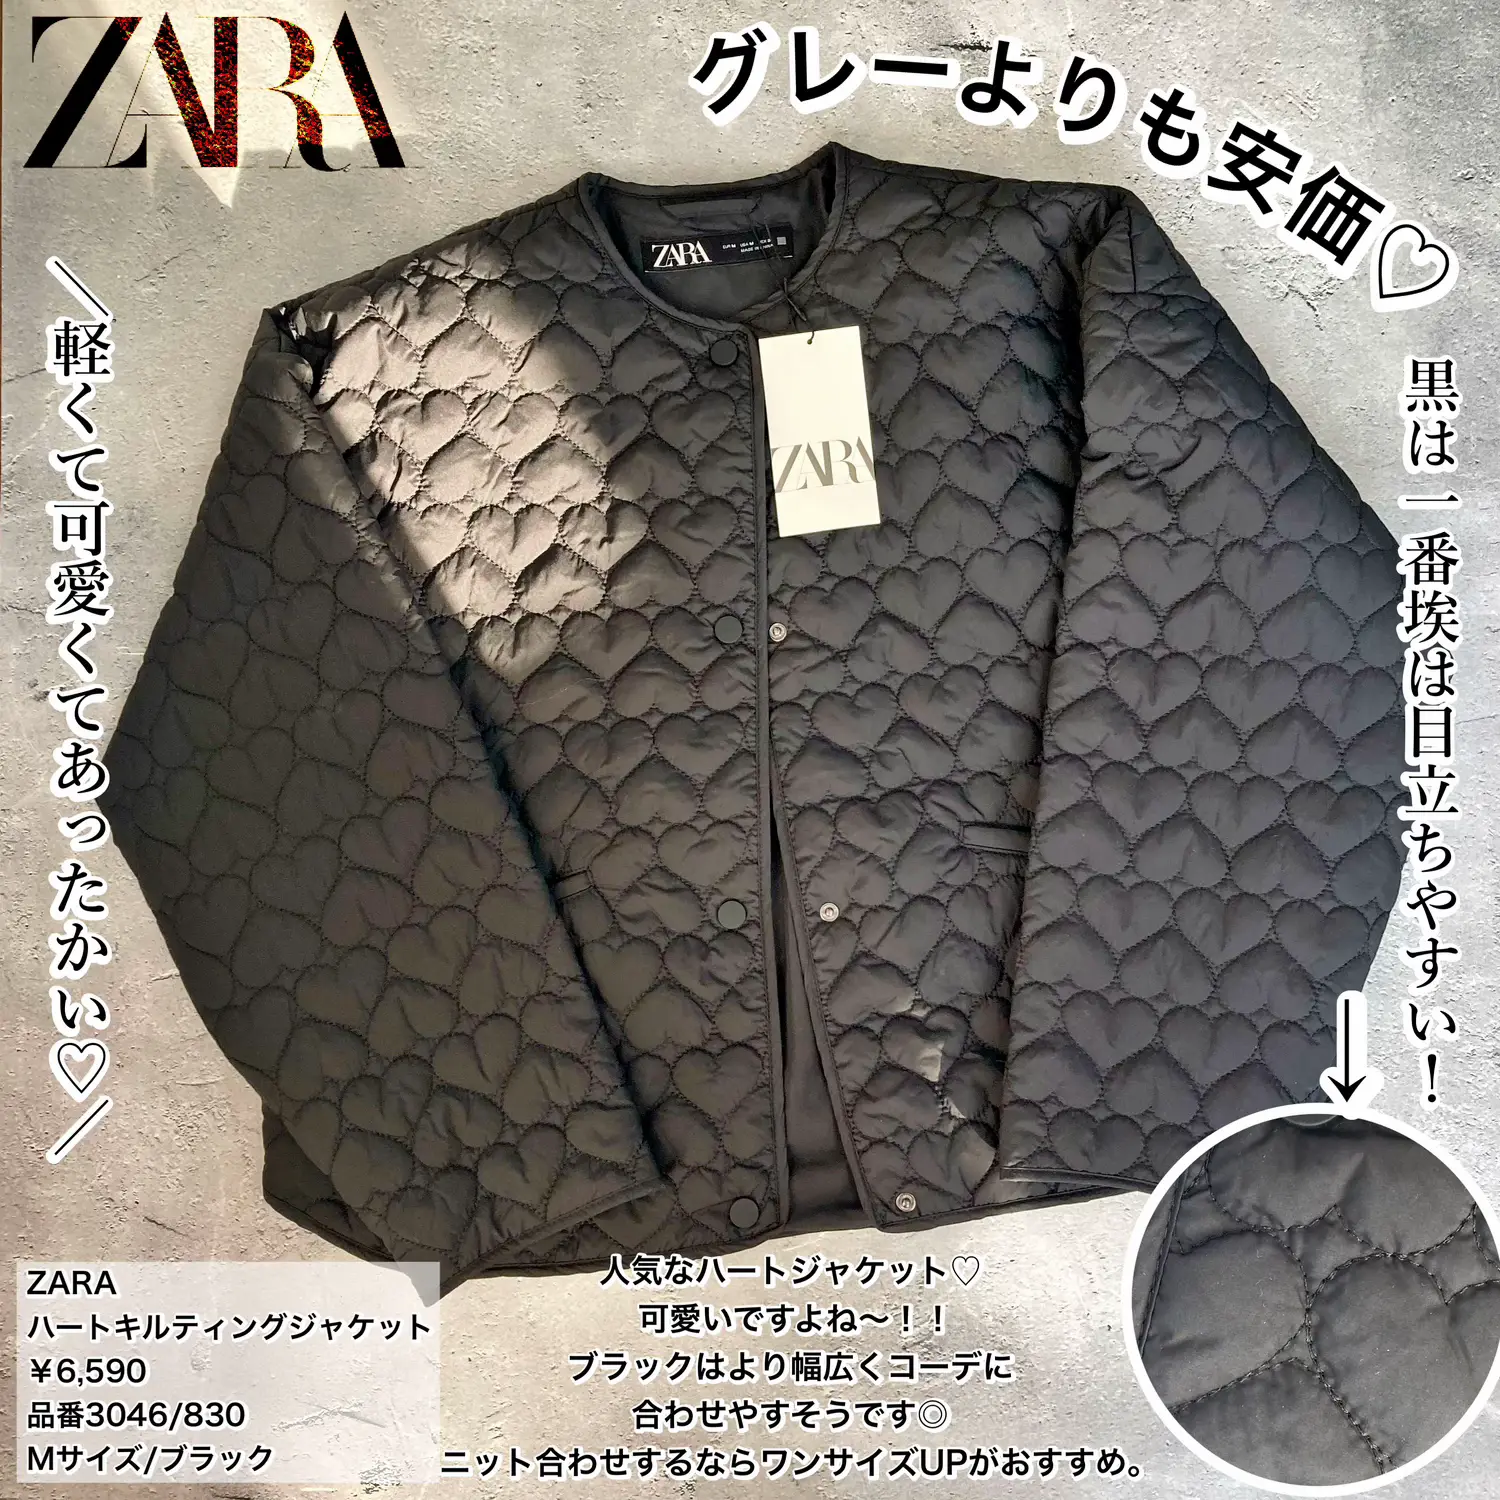 ZARA 】 Wearing a new color to the popular heart jacket    sold